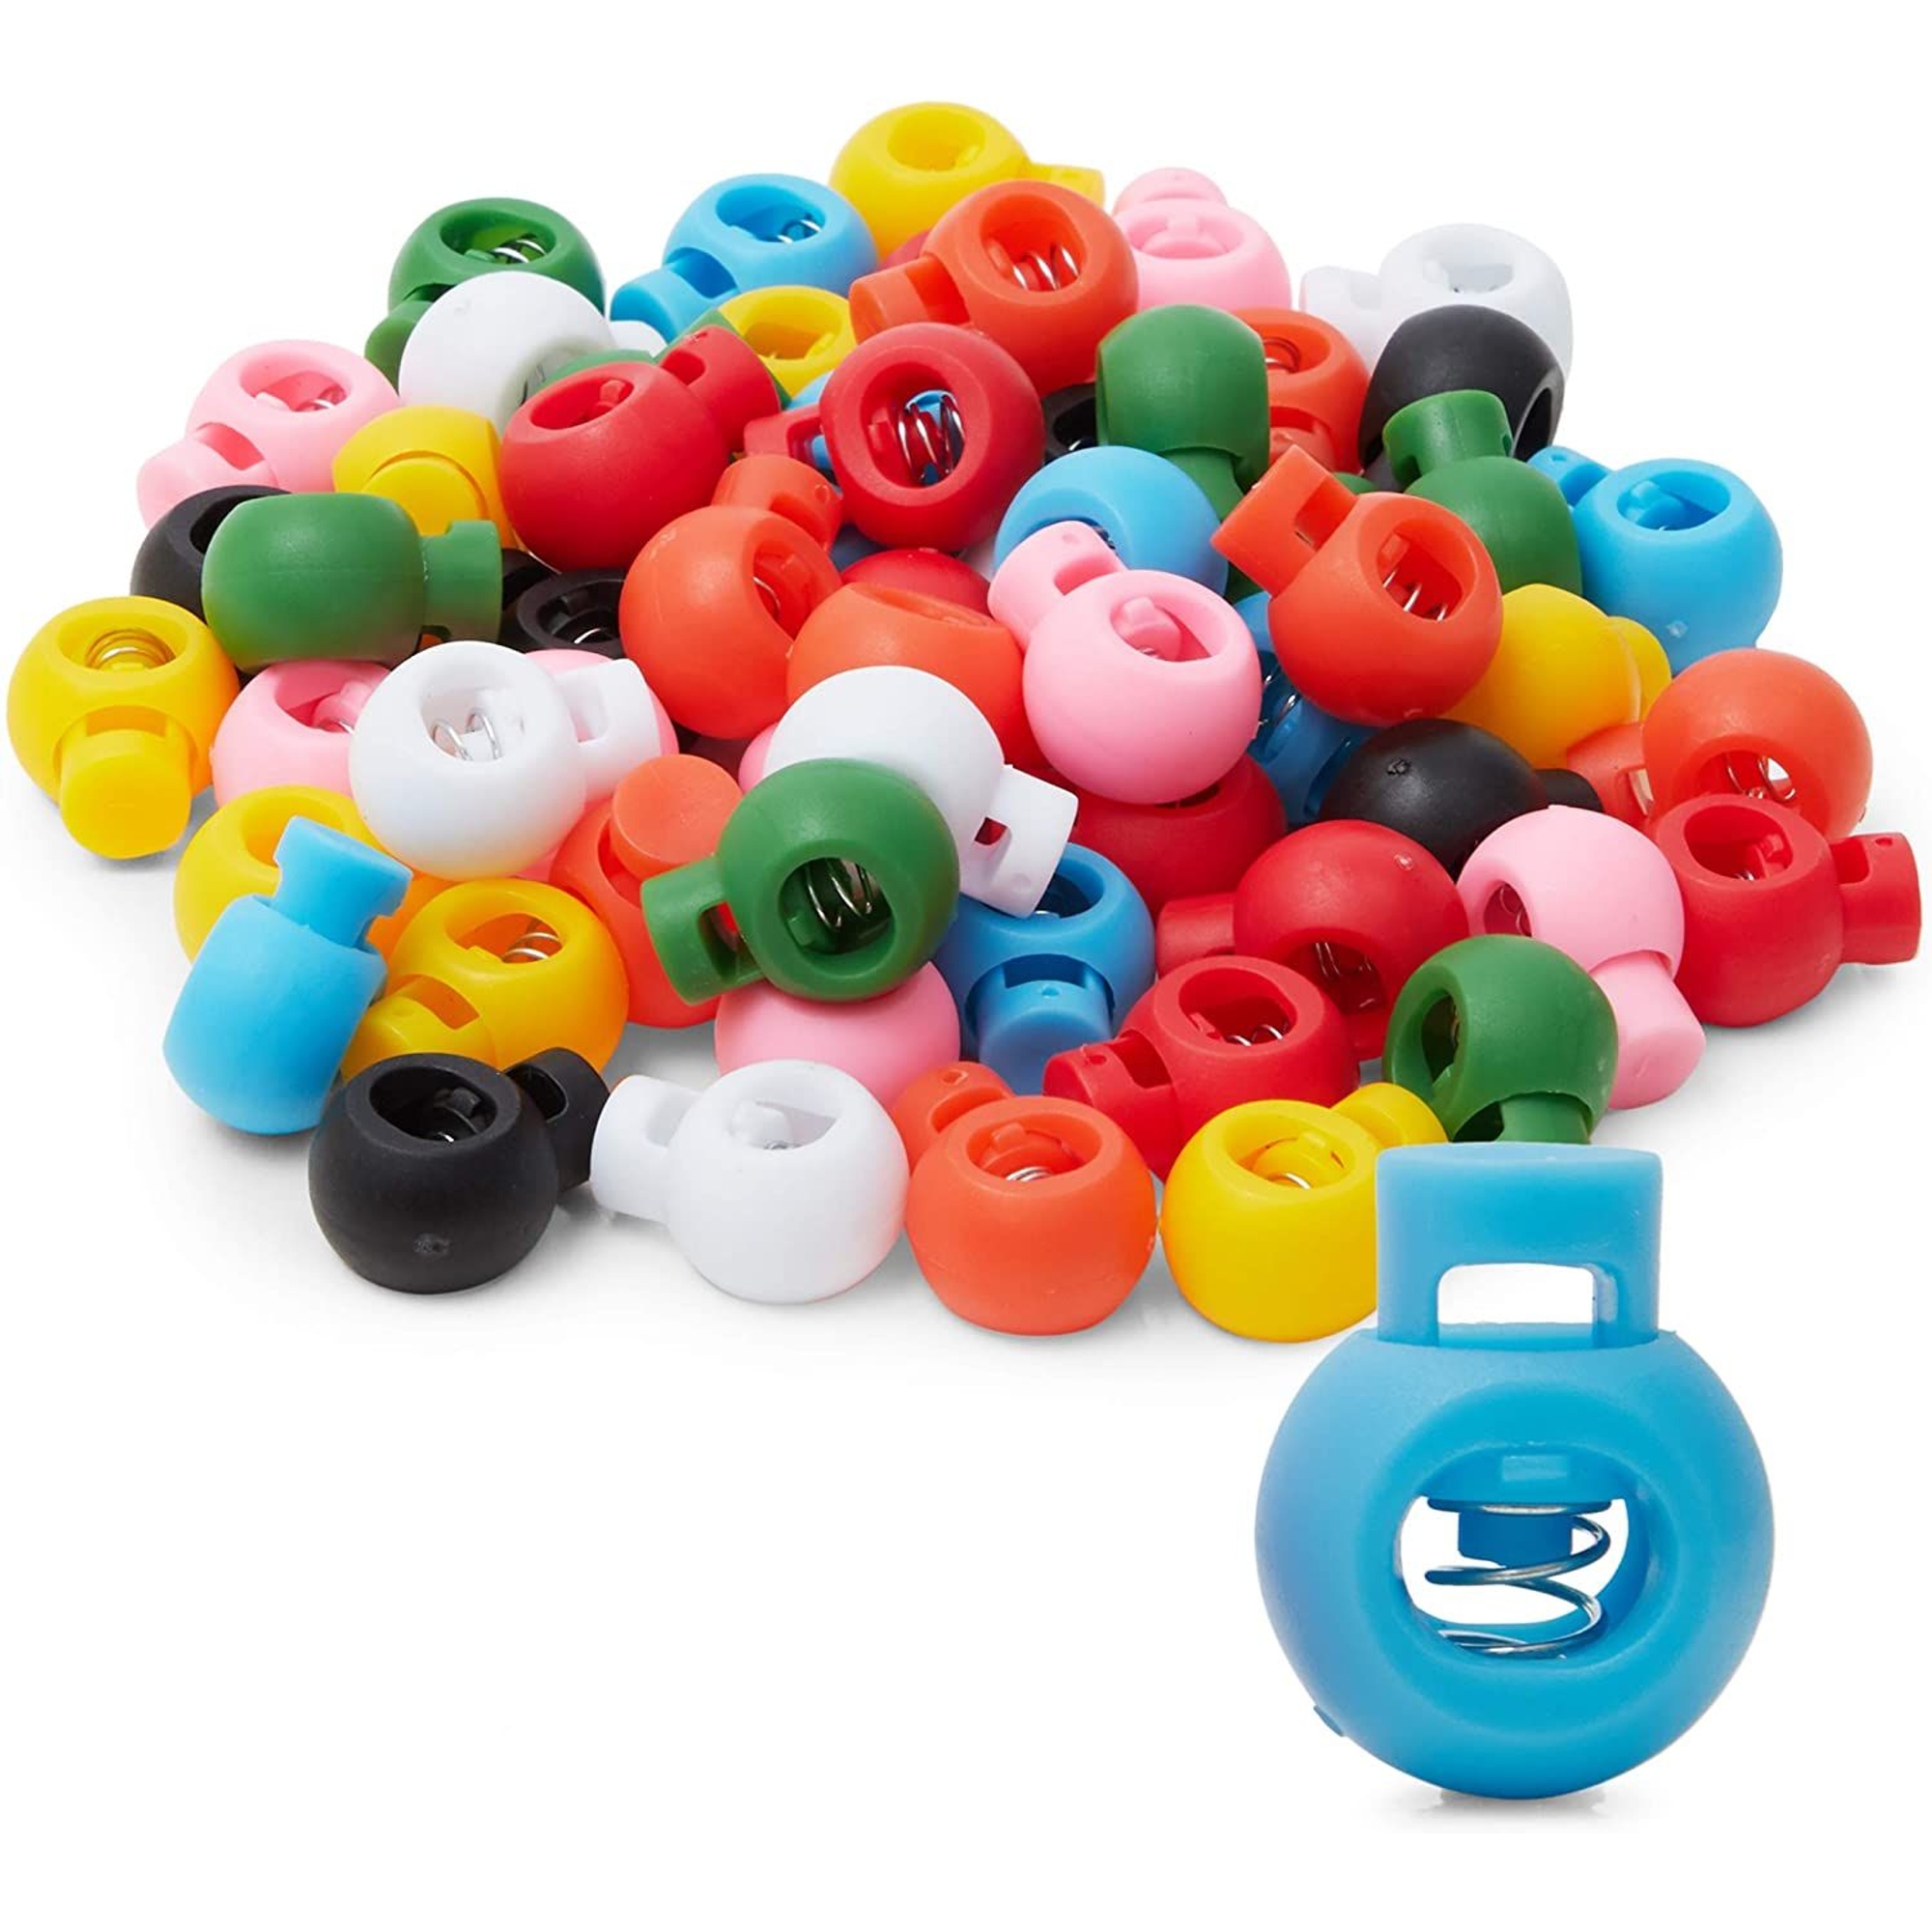 Round Toggle Stoppers, Plastic Cord Locks in 8 Colors (60 Pieces)